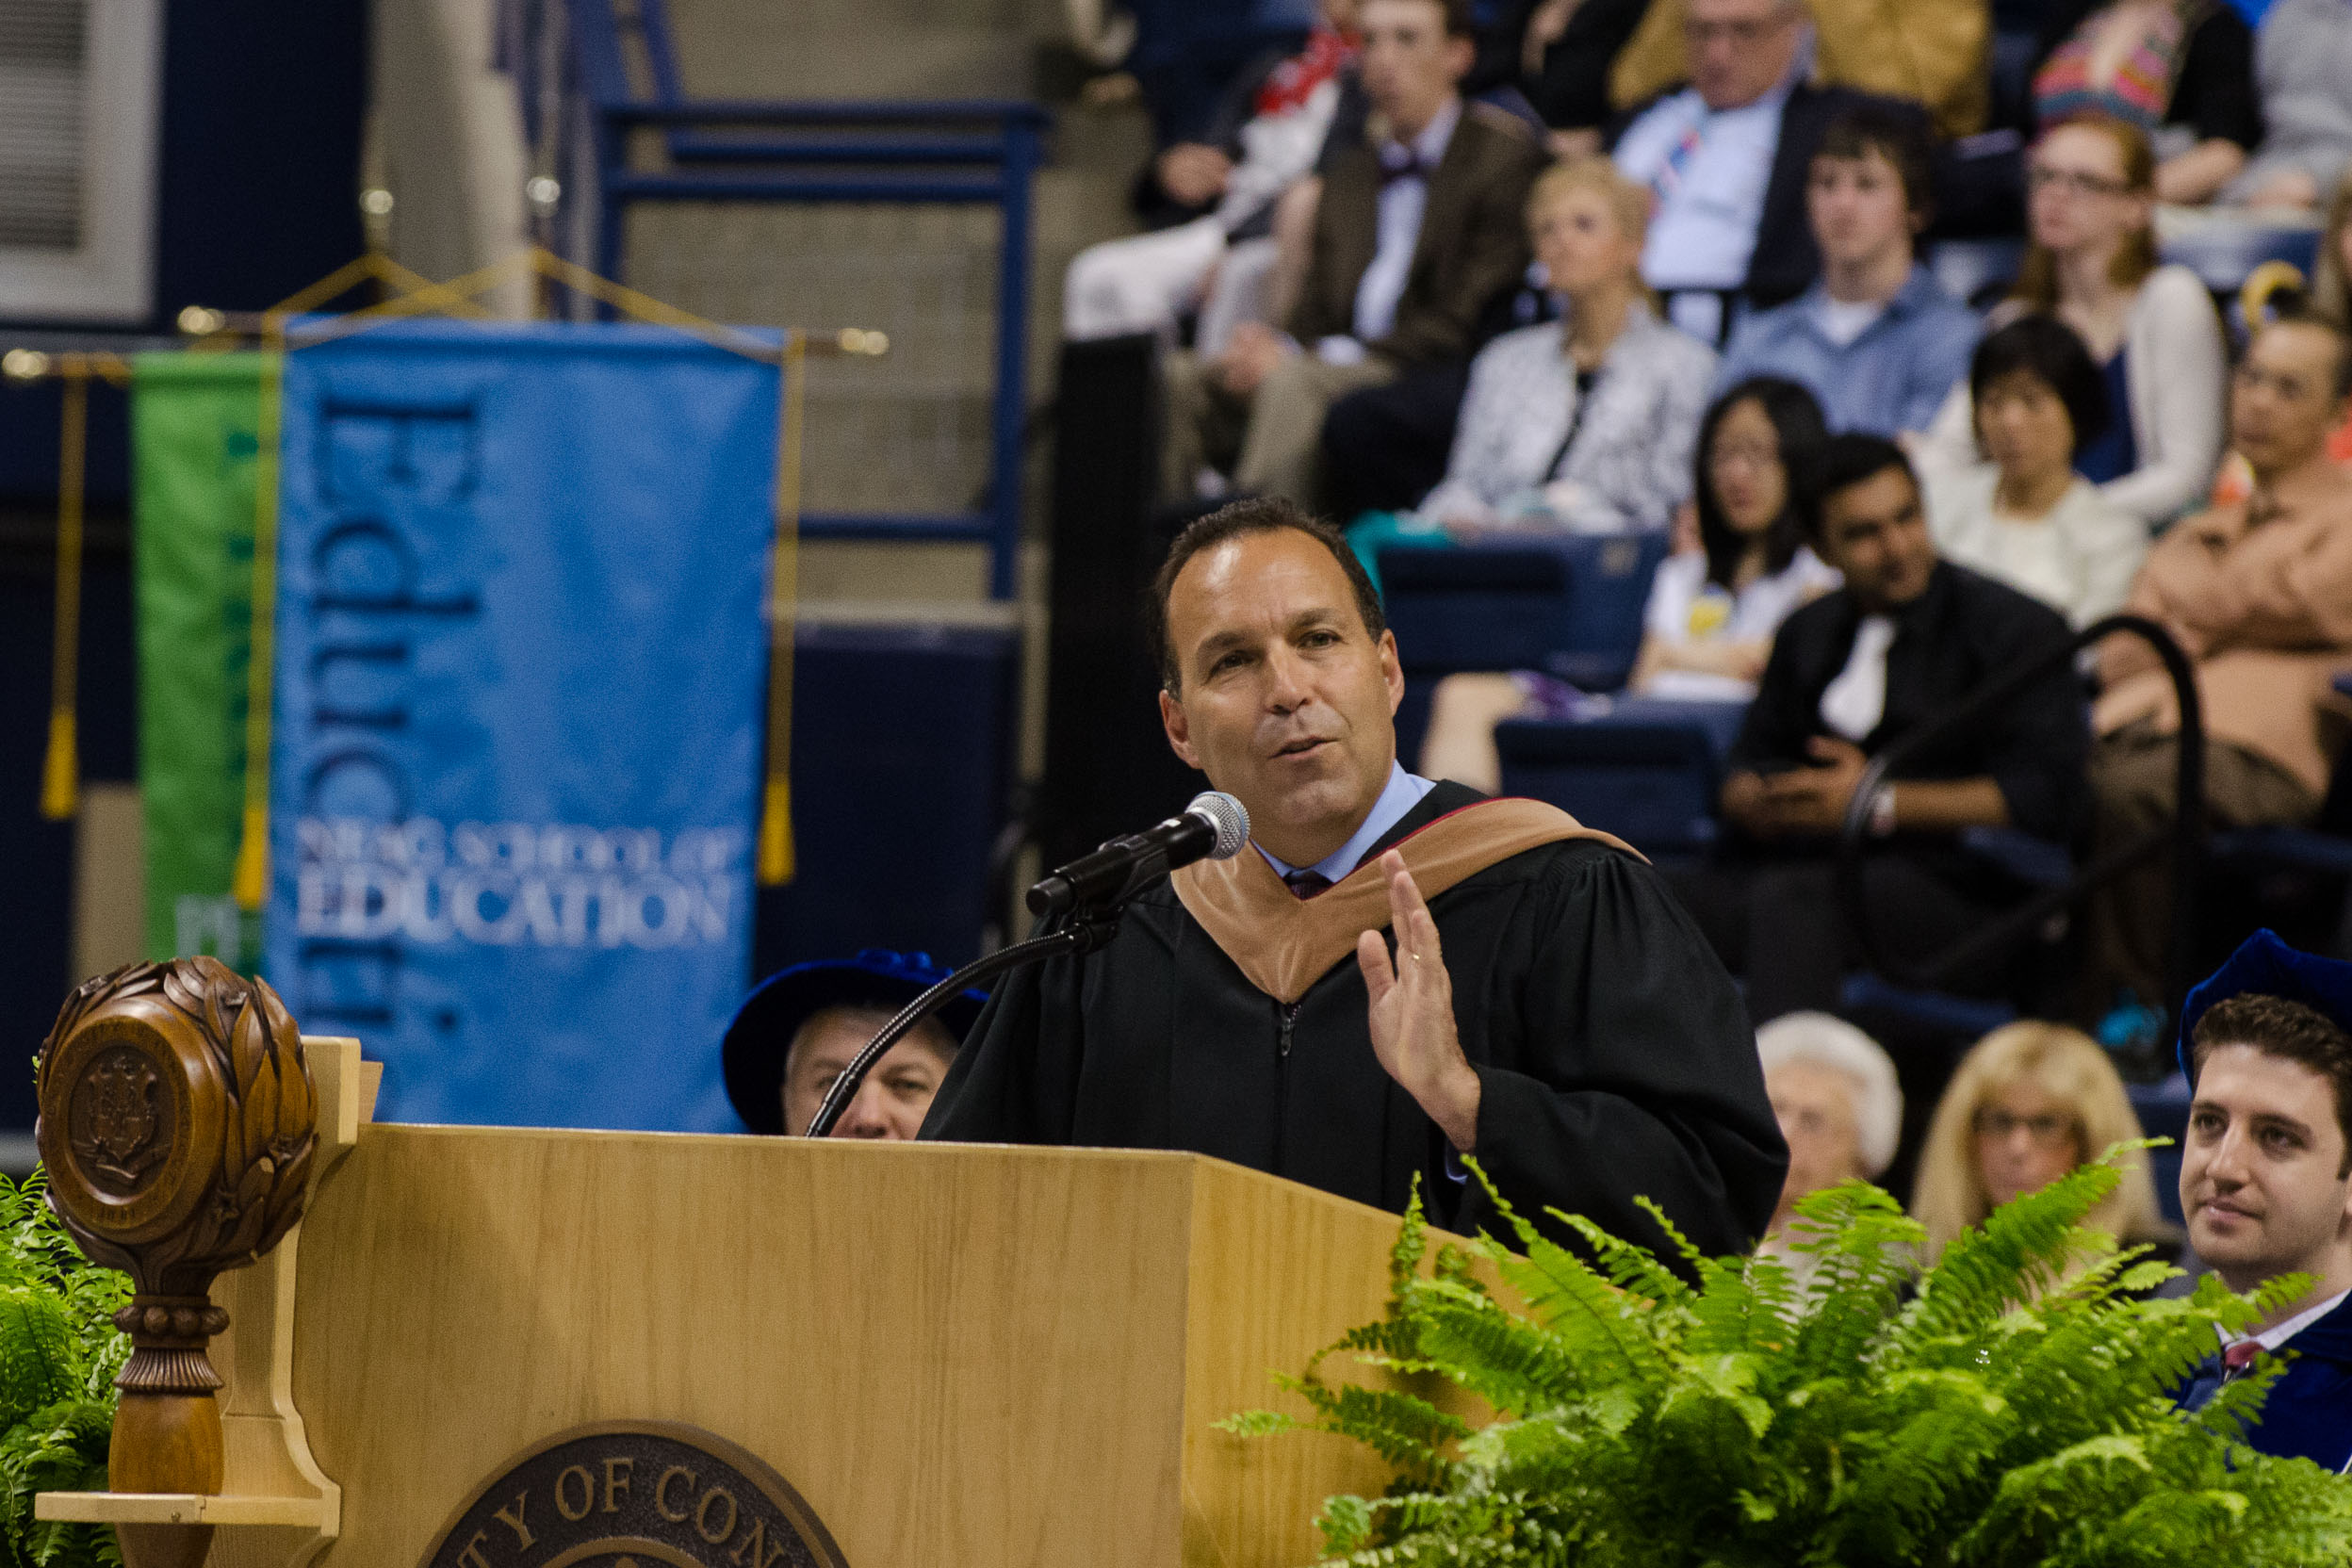 Daniel Toscano '87 (BUS) gives the keynote address at the School of Business Commencement ceremony held at Gampel Pavilion on May 12, 2013. (Ariel Dowski/UConn Photo)